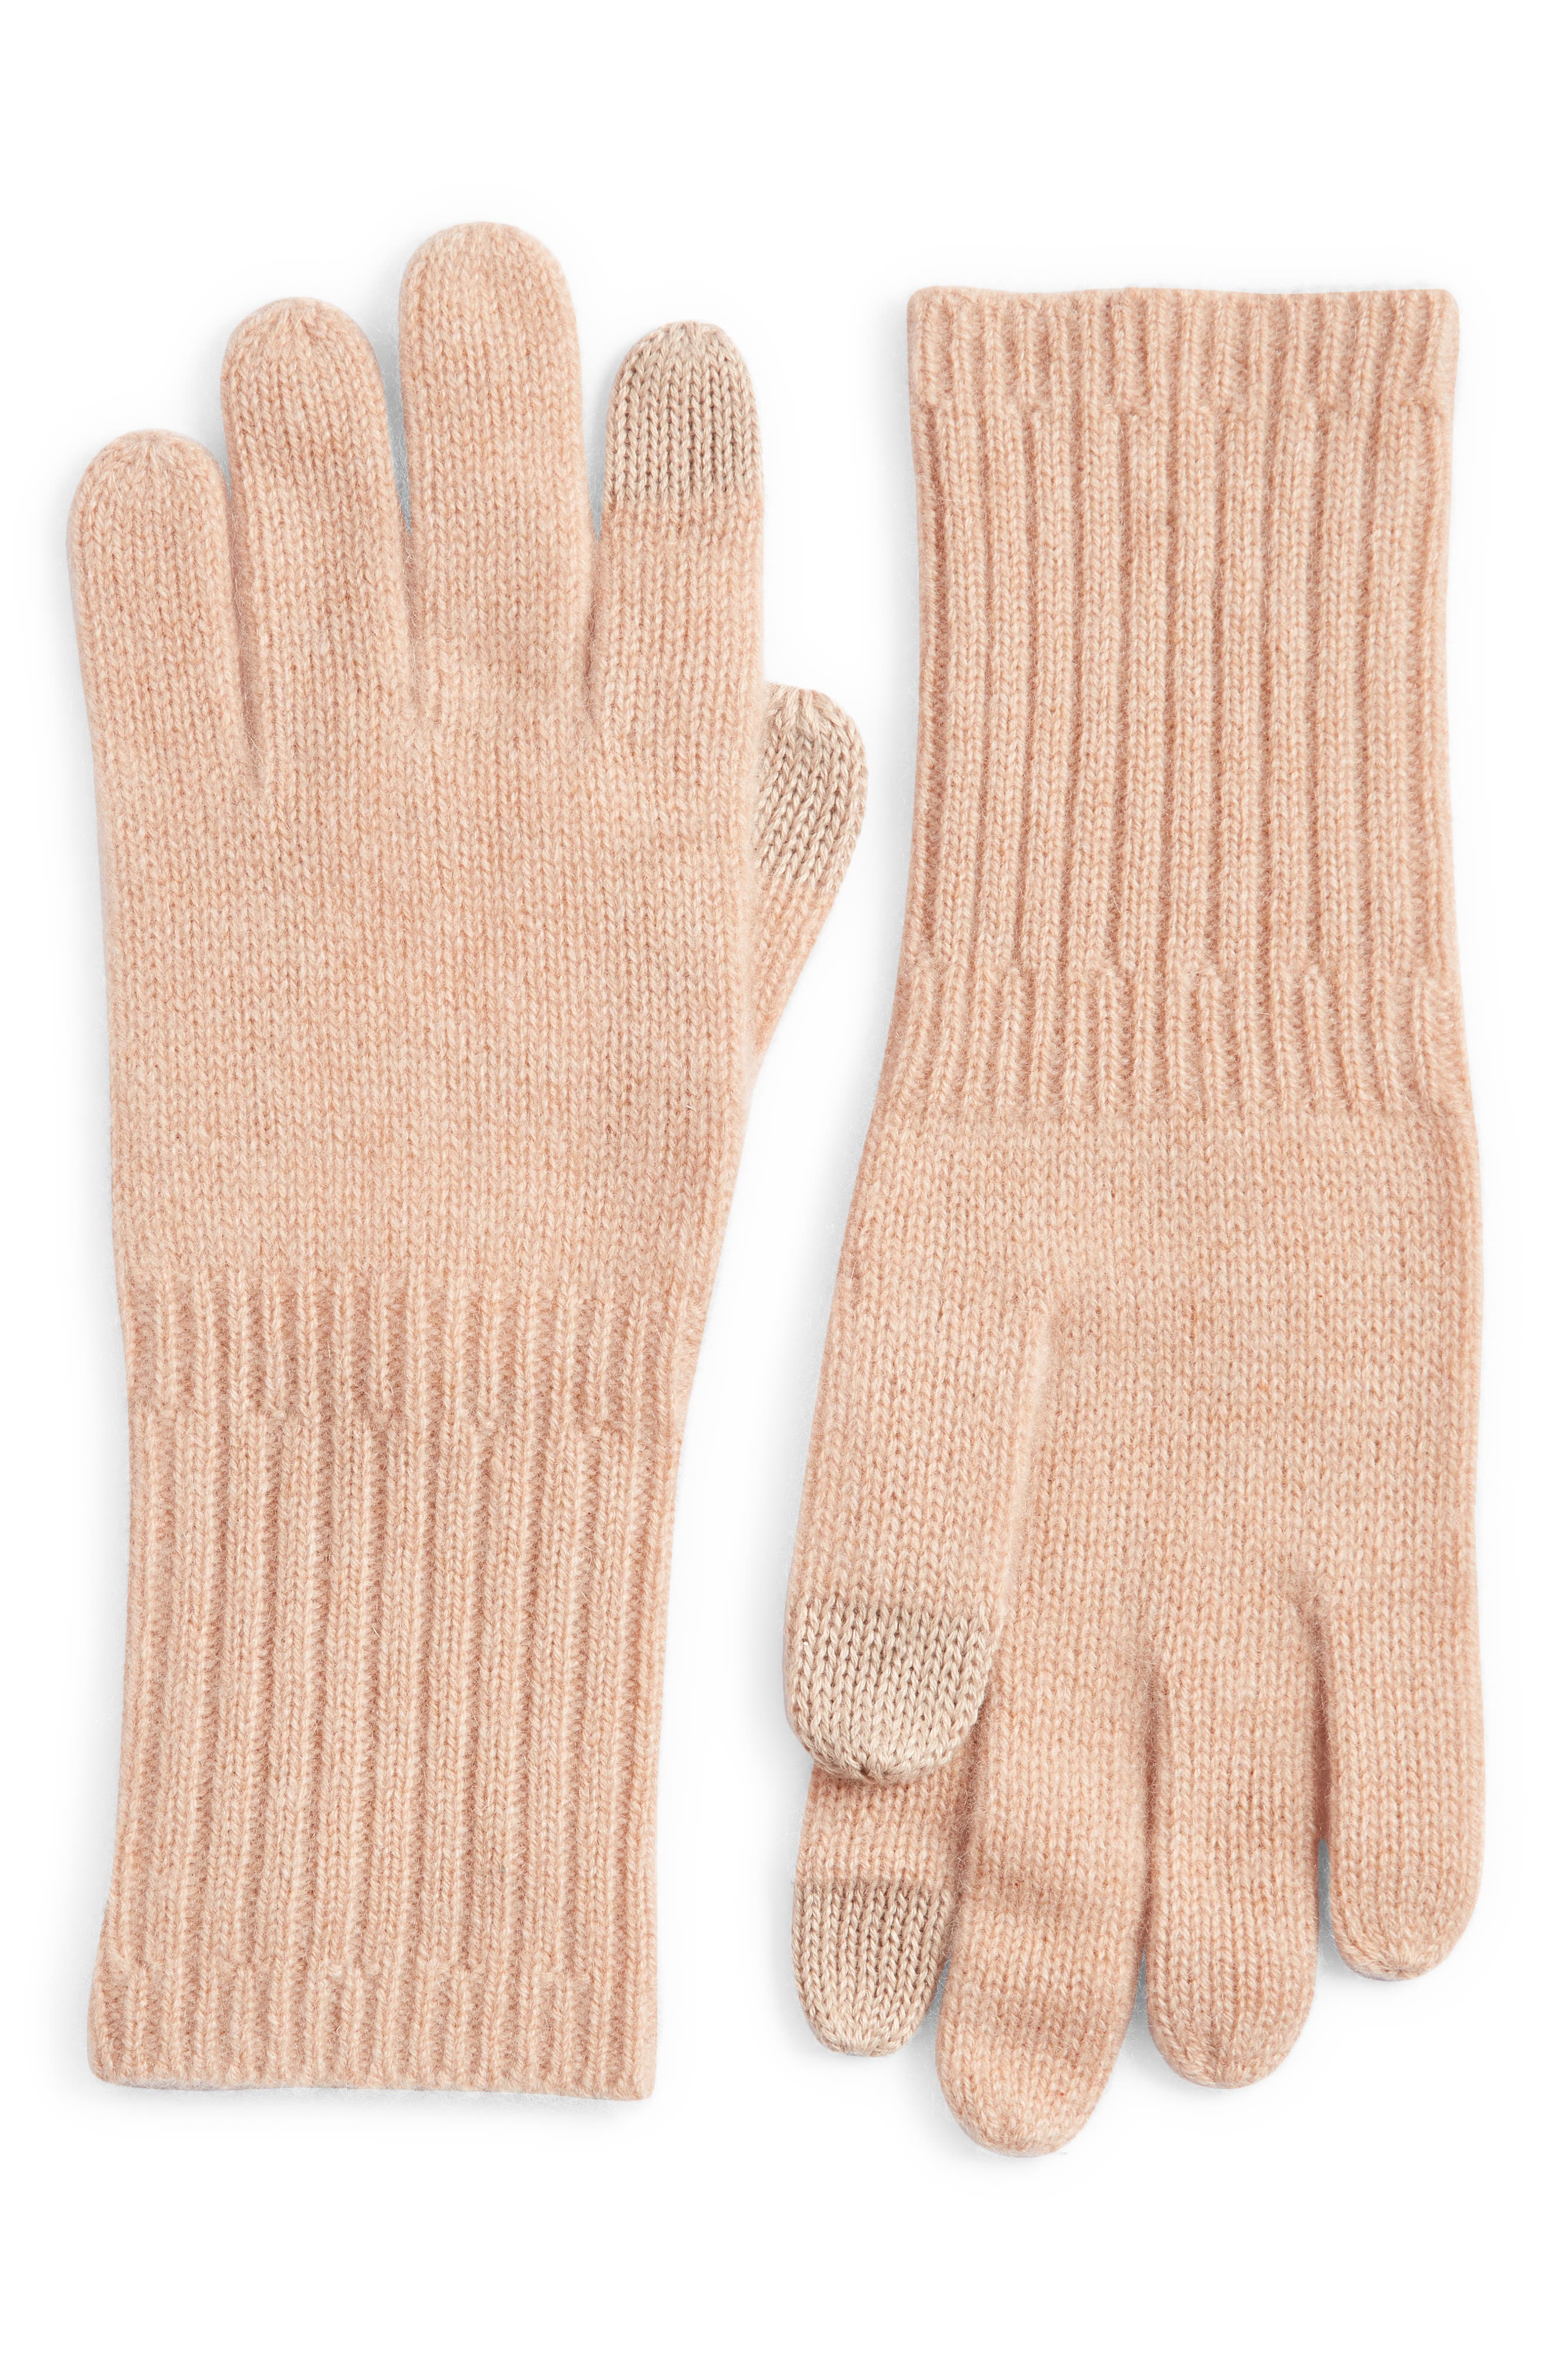 S/M NWT $89 Nordstrom Leather Gloves Cashmere Lining Sz